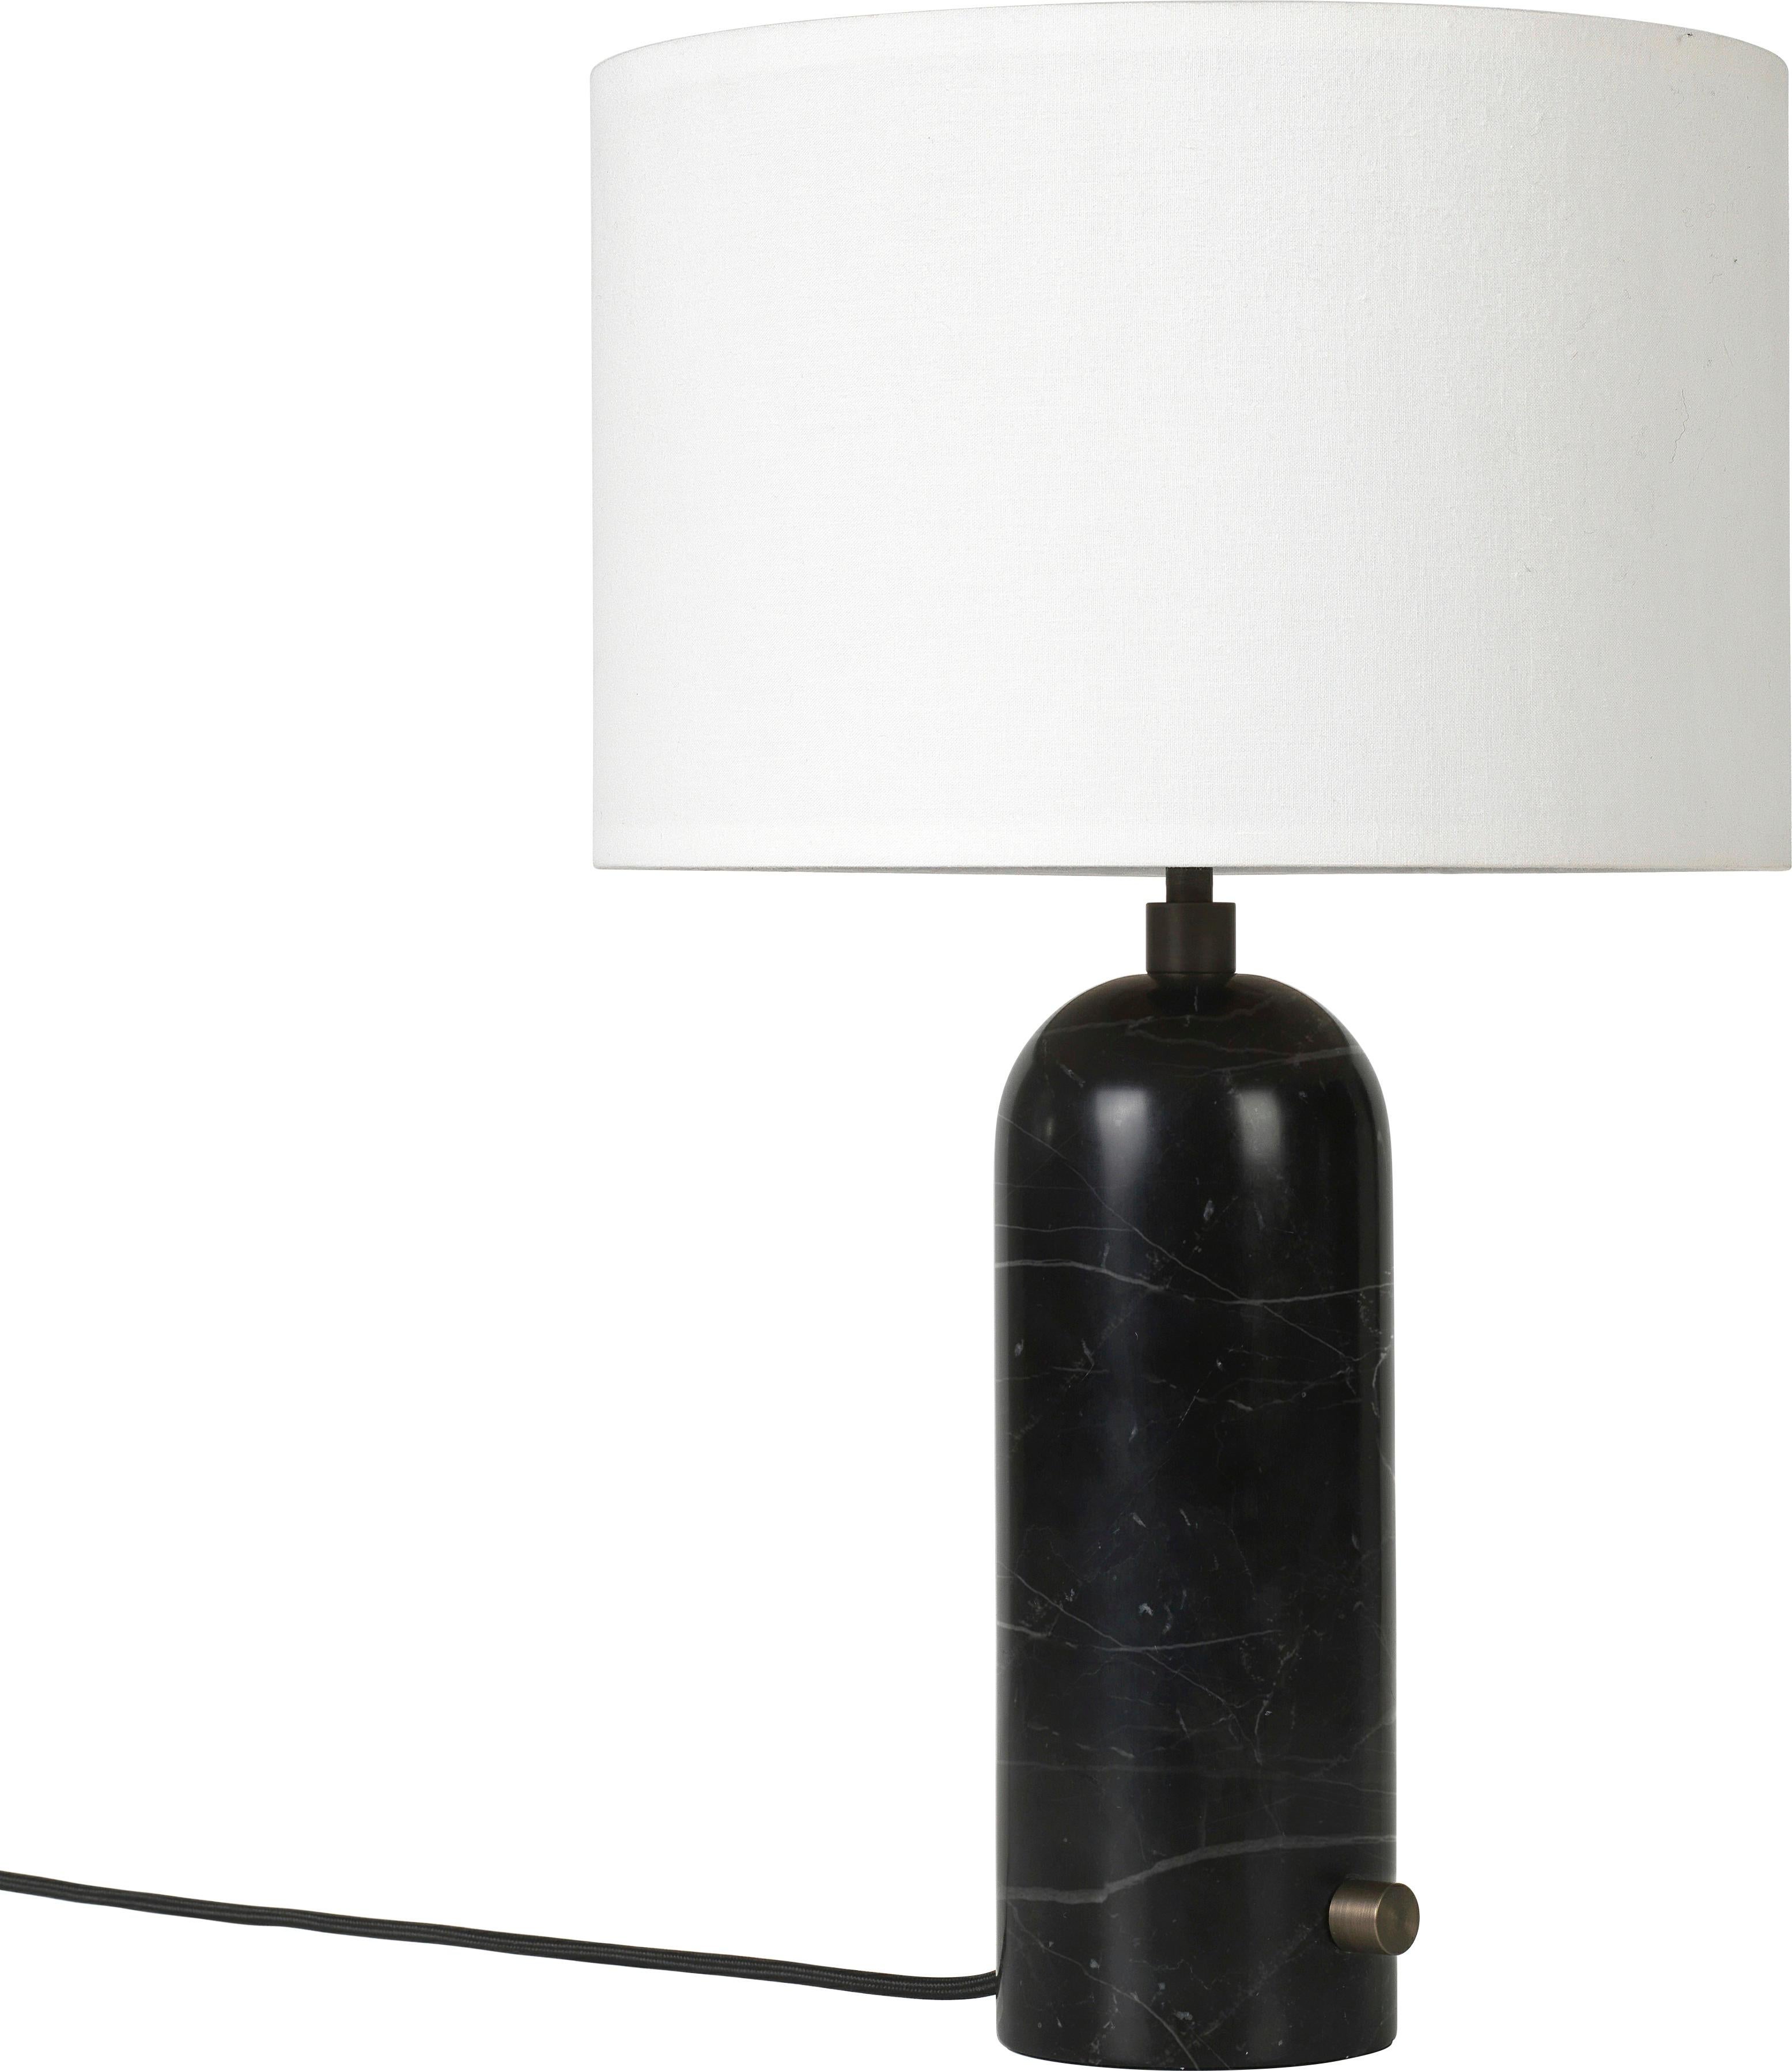 Small 'Gravity' Blackened Steel Table Lamp by Space Copenhagen for Gubi For Sale 9